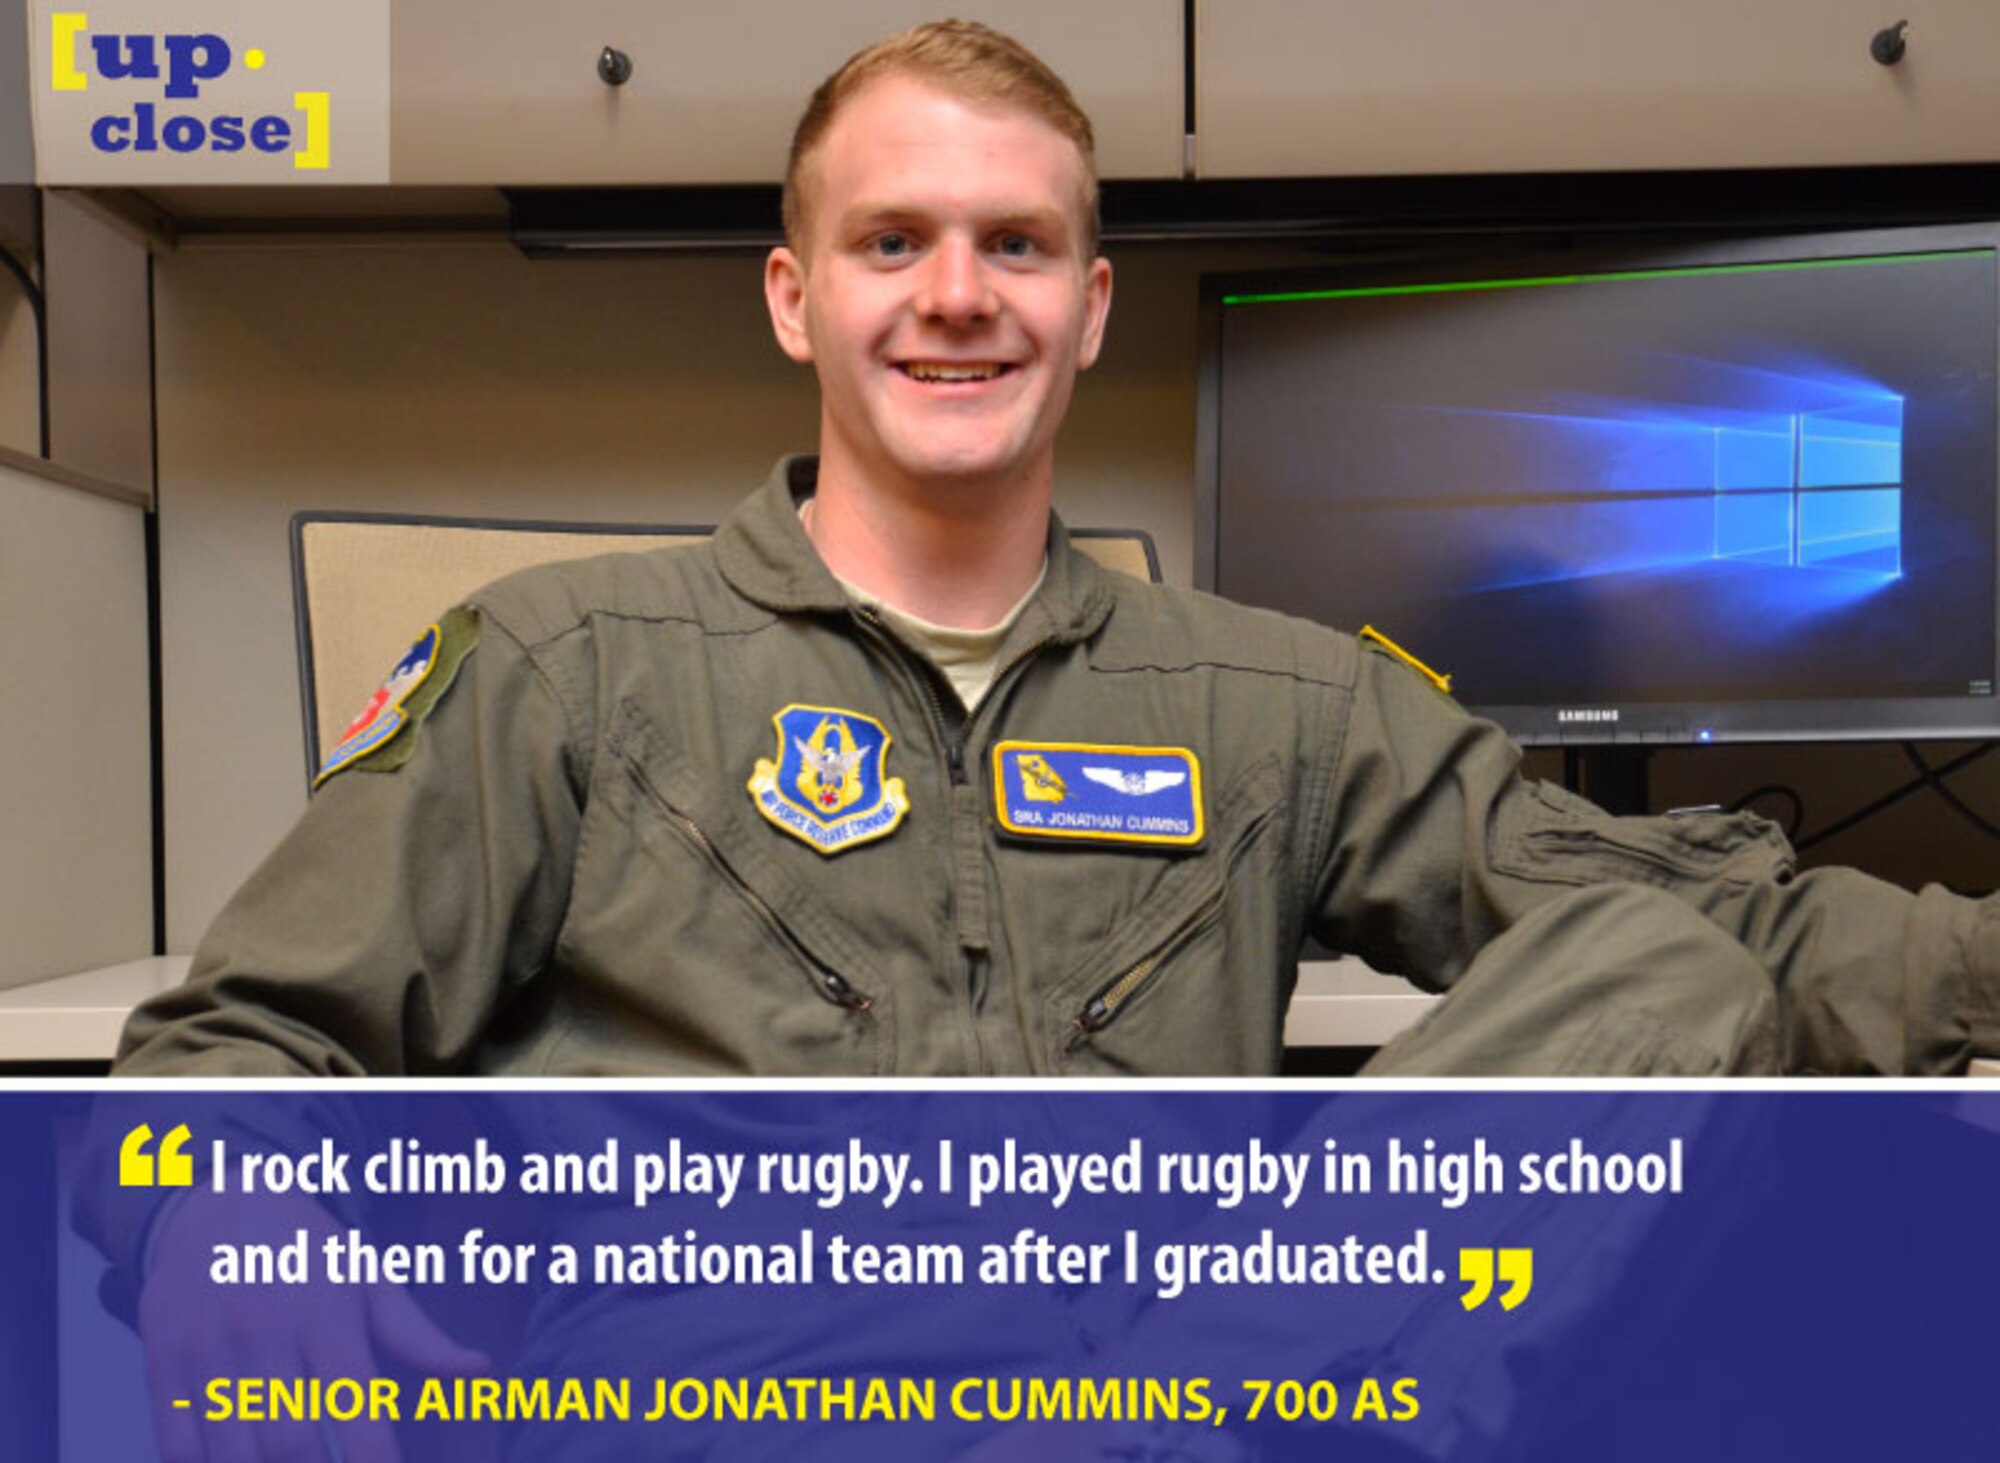 Senior Airman Jonathan Cummins, a 700th Airlift Squadron flight engineer, is this week's Up Close personality. Up Close is a weekly series spotlighting individuals around Dobbins Air Reserve Base. (U.S. Air Force graphic/Staff Sgt. Andrew Park; Photo/Senior Airman Lauren Douglas)